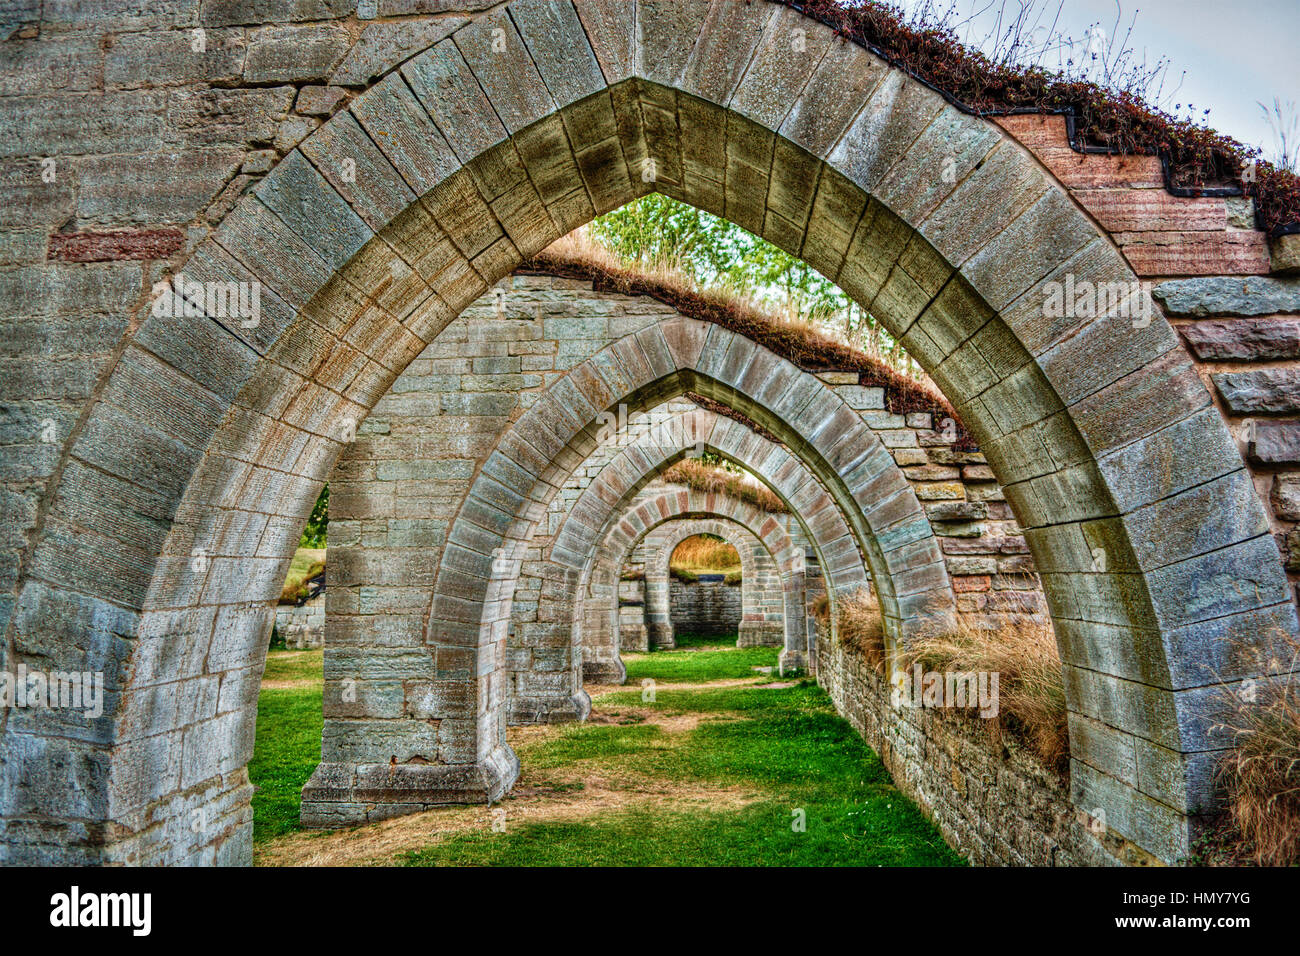 July 2016, ruins of the Alvastra Monastery in Ostergotland (East Gothland) in Sweden, HDR-technique Stock Photo